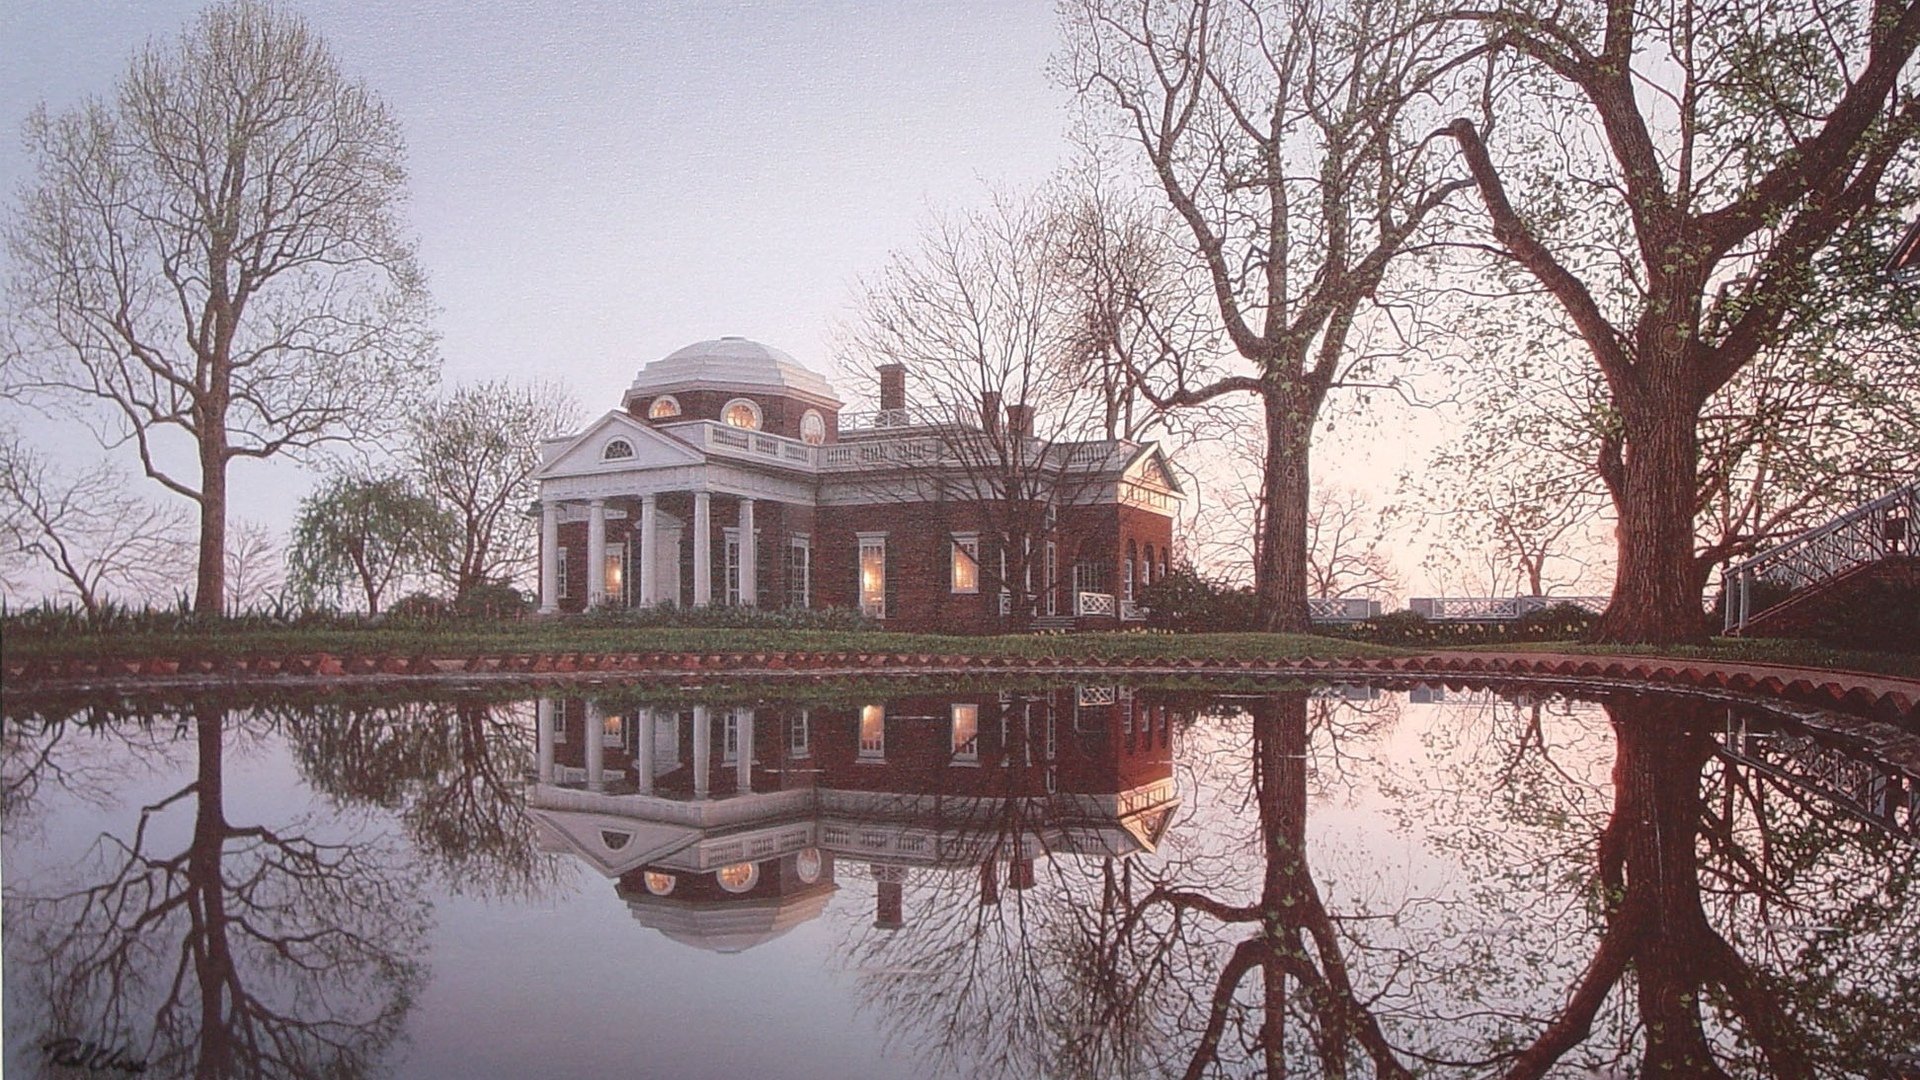 Jefferson monticello, Virginia, USA, Old building, Water, Reflection, Trees, Architecture Wallpaper